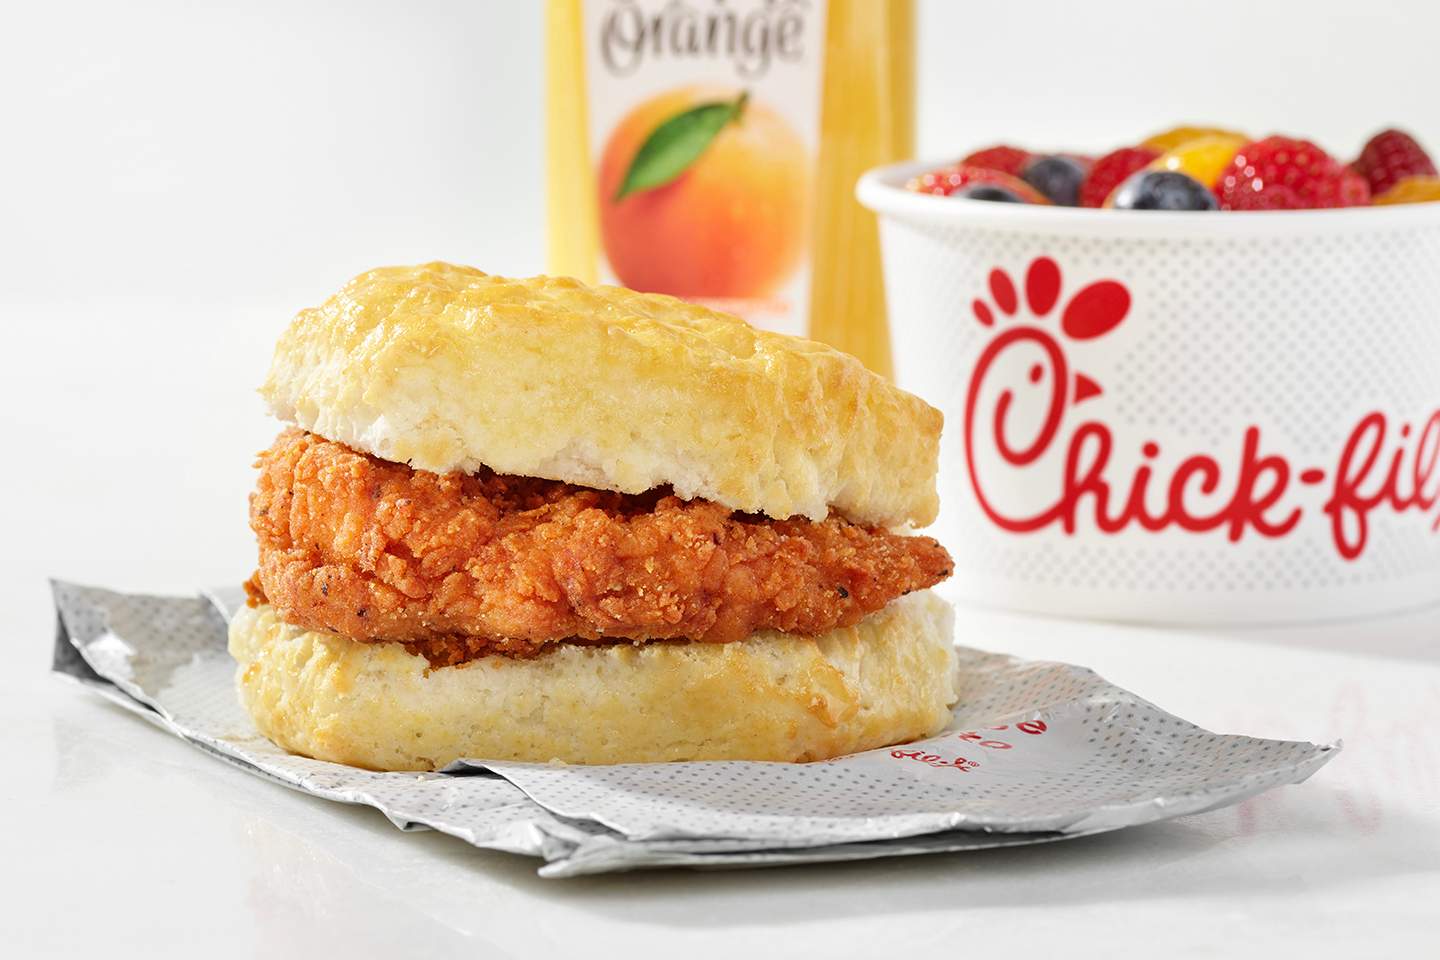  A Chick-fil-A Spicy Chicken Biscuit with a small fruit cup and orange juice